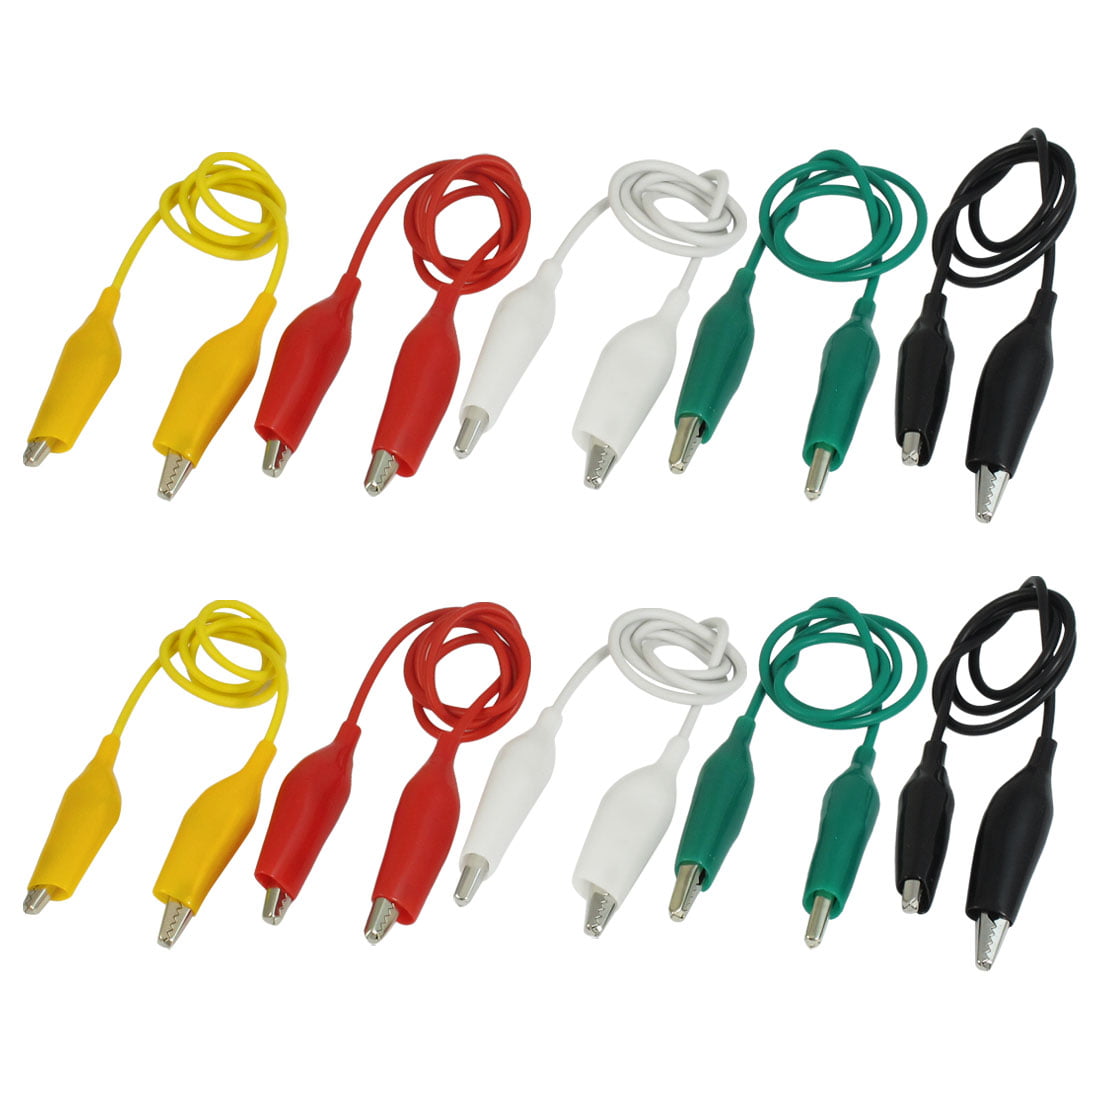 10 Pcs 5-Color Double Ended Alligator Clips Test Lead Jumper Wire 48cm 1.6 F t8u 